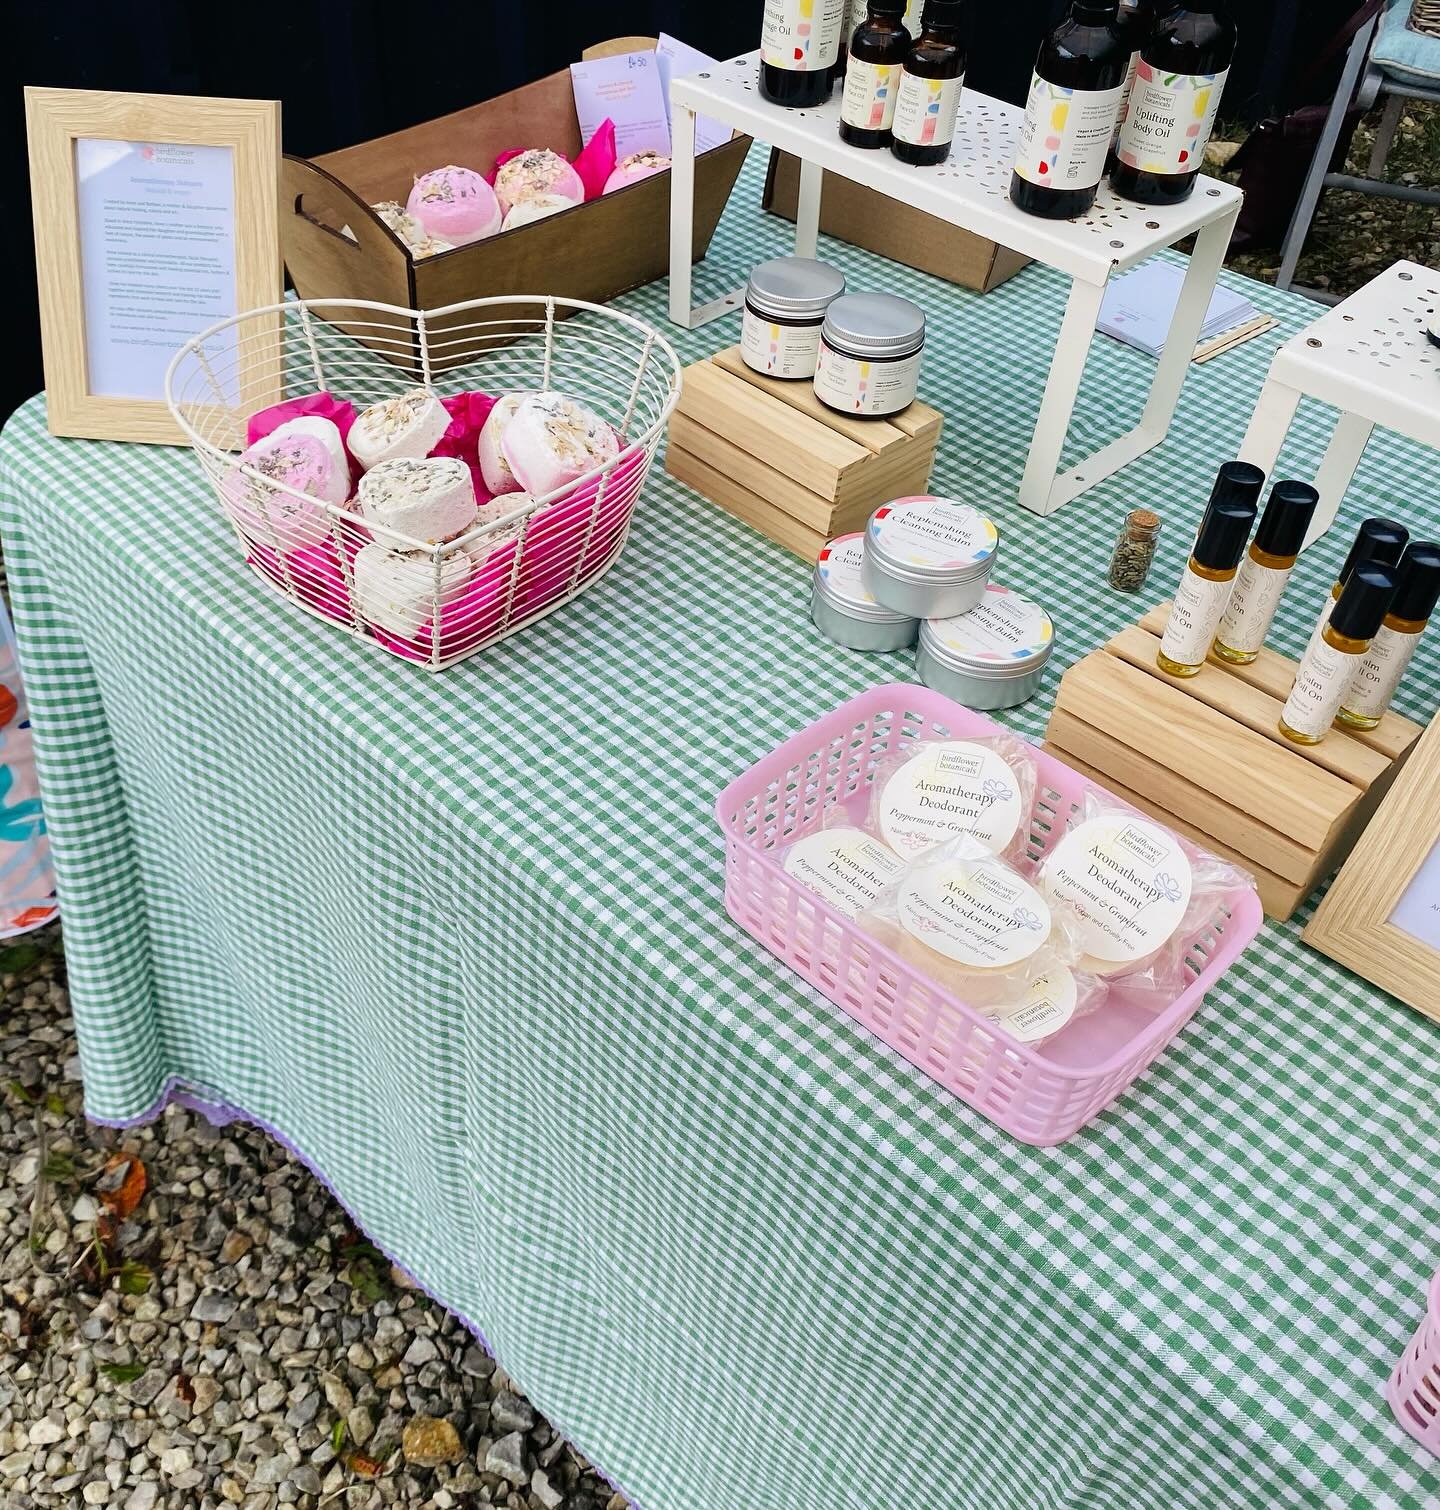 We had a lovely day on Saturday @ecohub.emley spring market. It was great to meet so many people interested in clean skincare, It&rsquo;s my passion talking to customers about their skin issues &amp; advising how to resolve them, with natural plant b